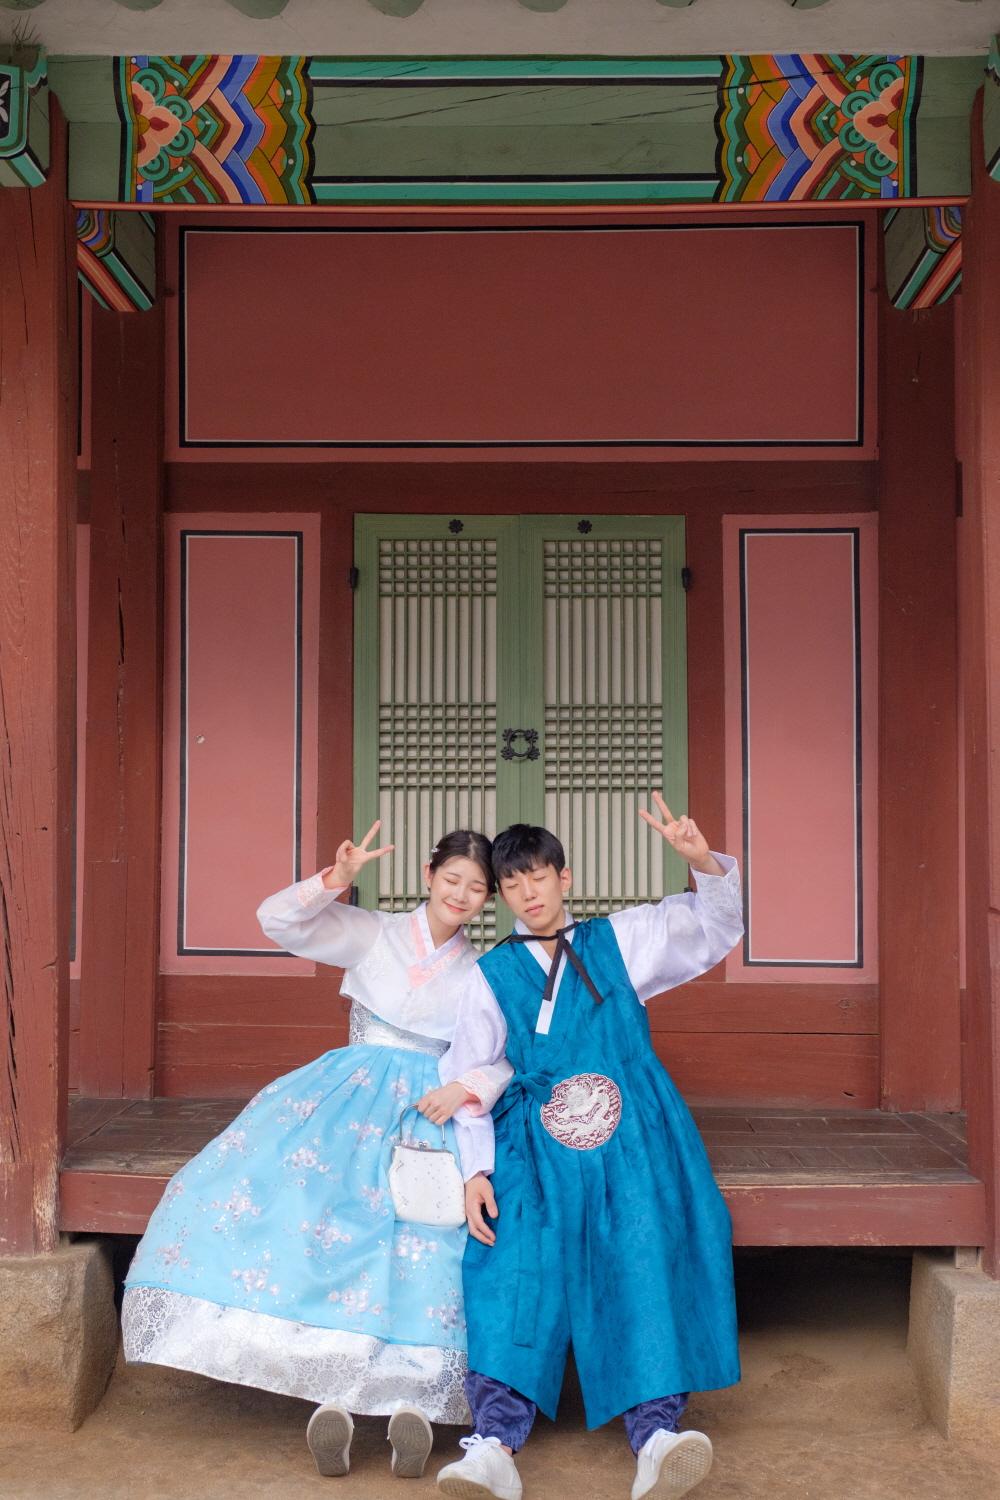 Smiling visitors wearing hanboks at Gyeongbokgung Palace, enjoying leisurely beauty of temple in various colors.